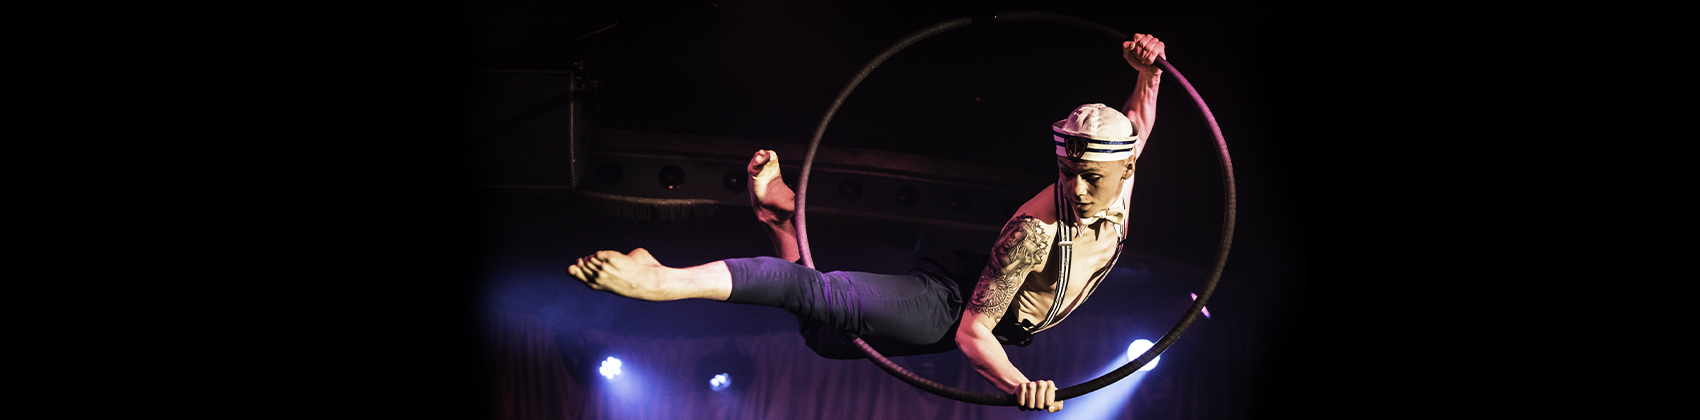 Professional Male Aerialist Available For Hire Musicians Inc 6209